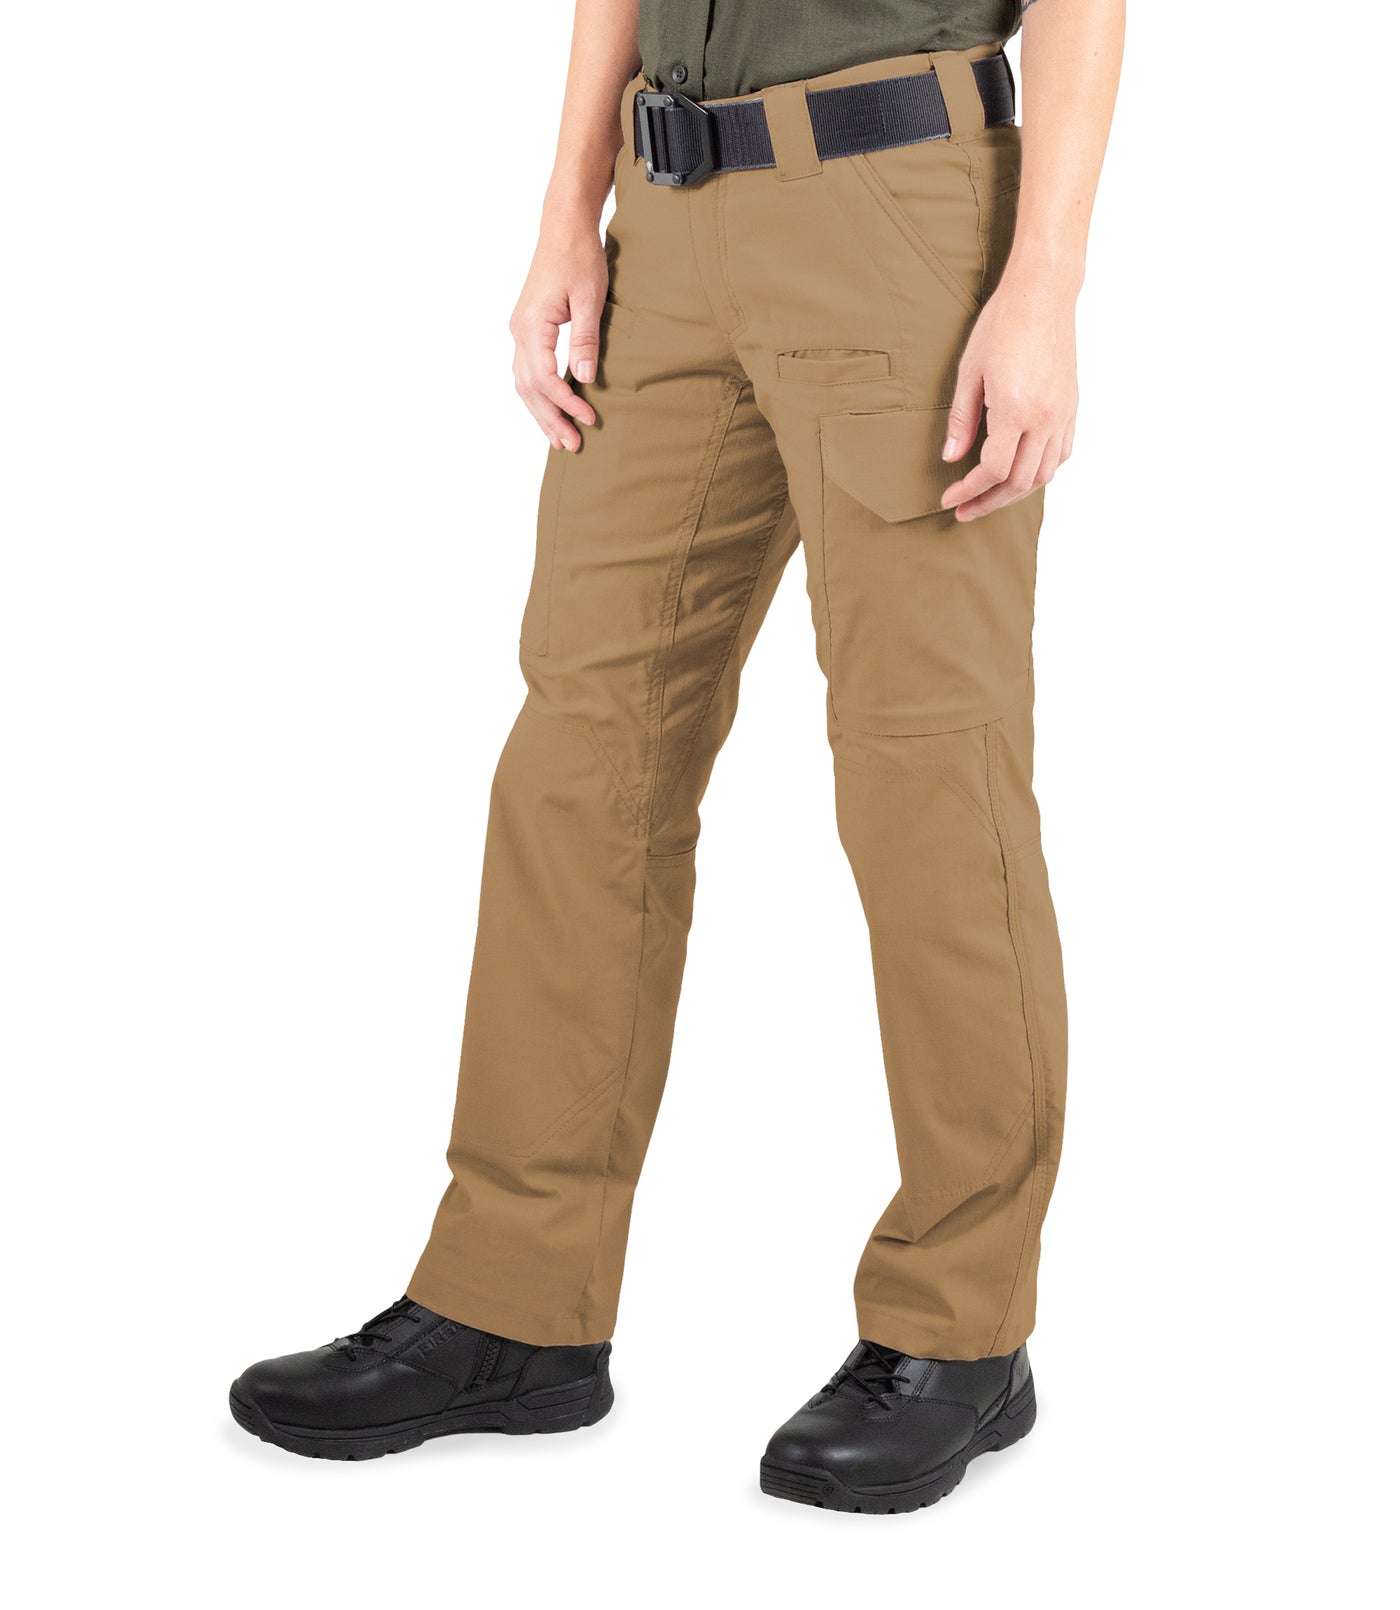 Side of Women's V2 Tactical Pants in Coyote Brown